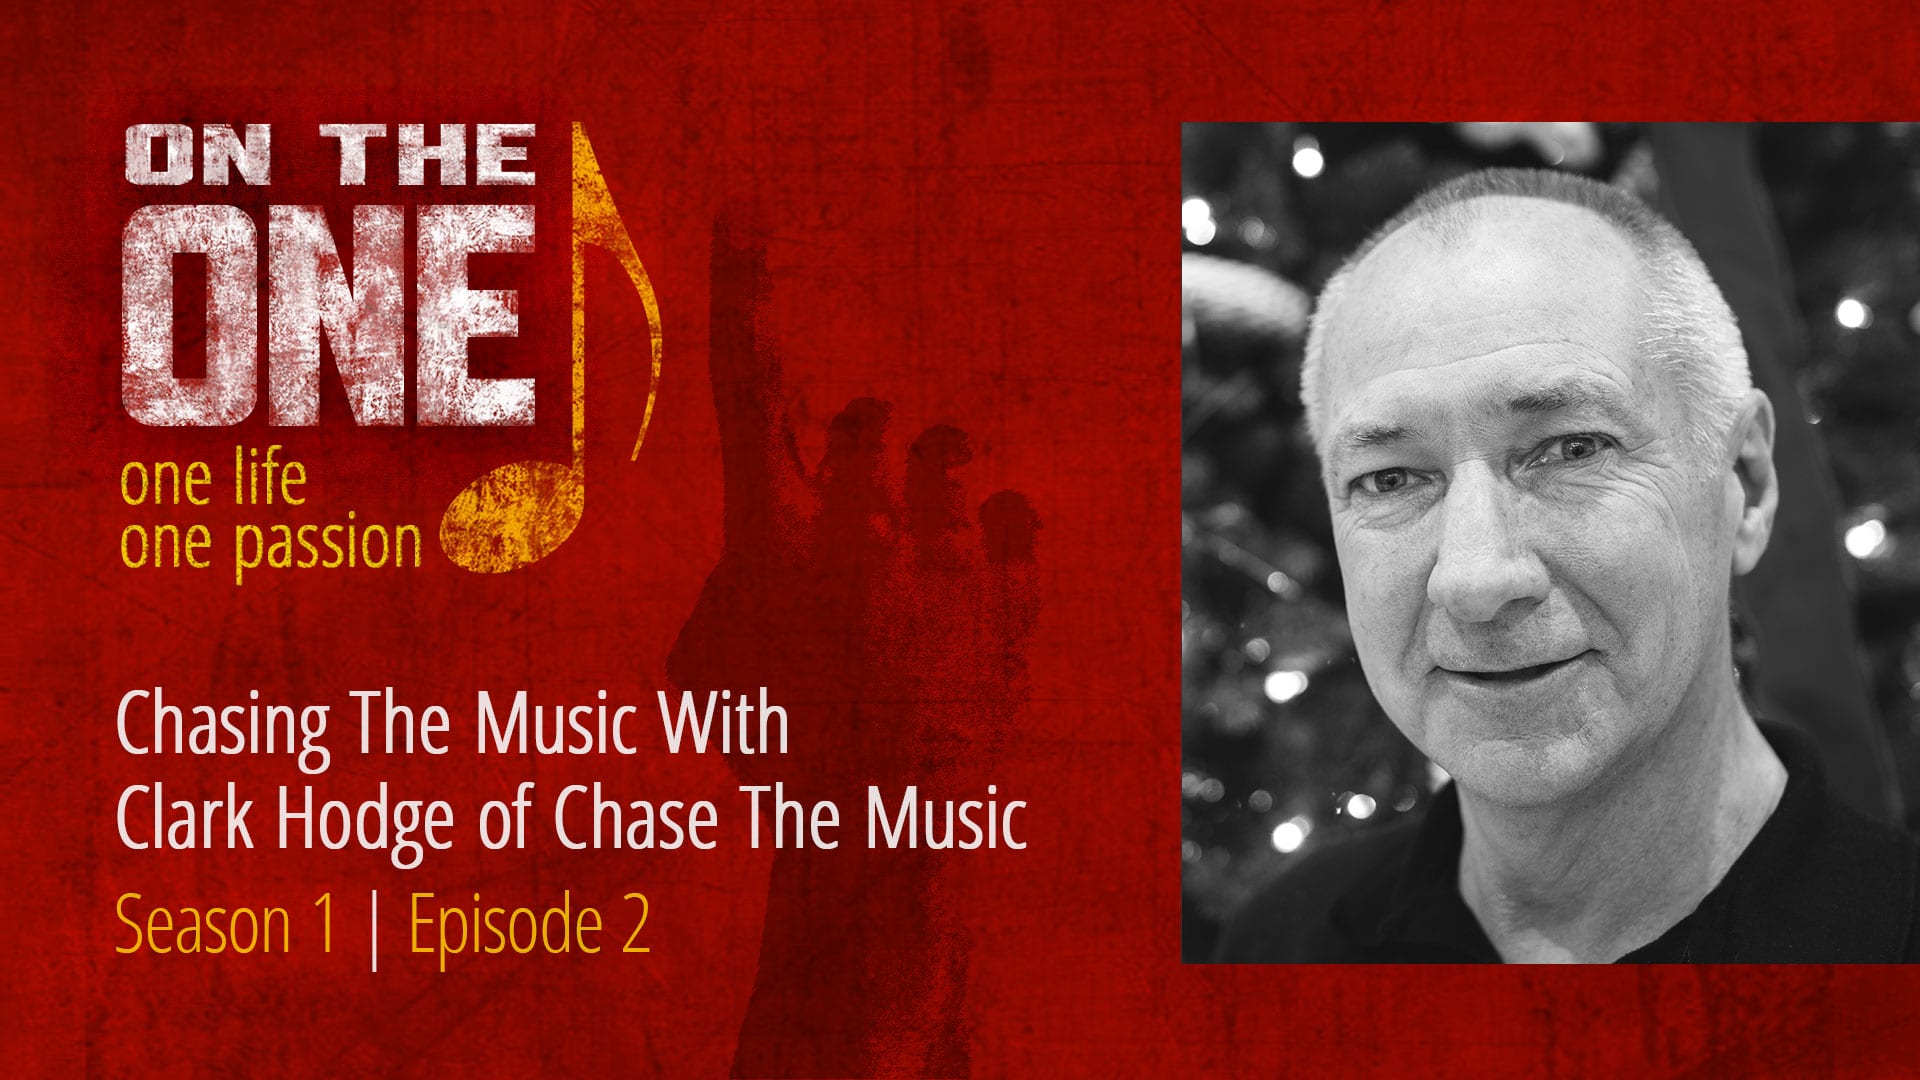 Clark Hodge shares the origins and mission of Chase The Music, which commissions original music for children facing critical health conditions.